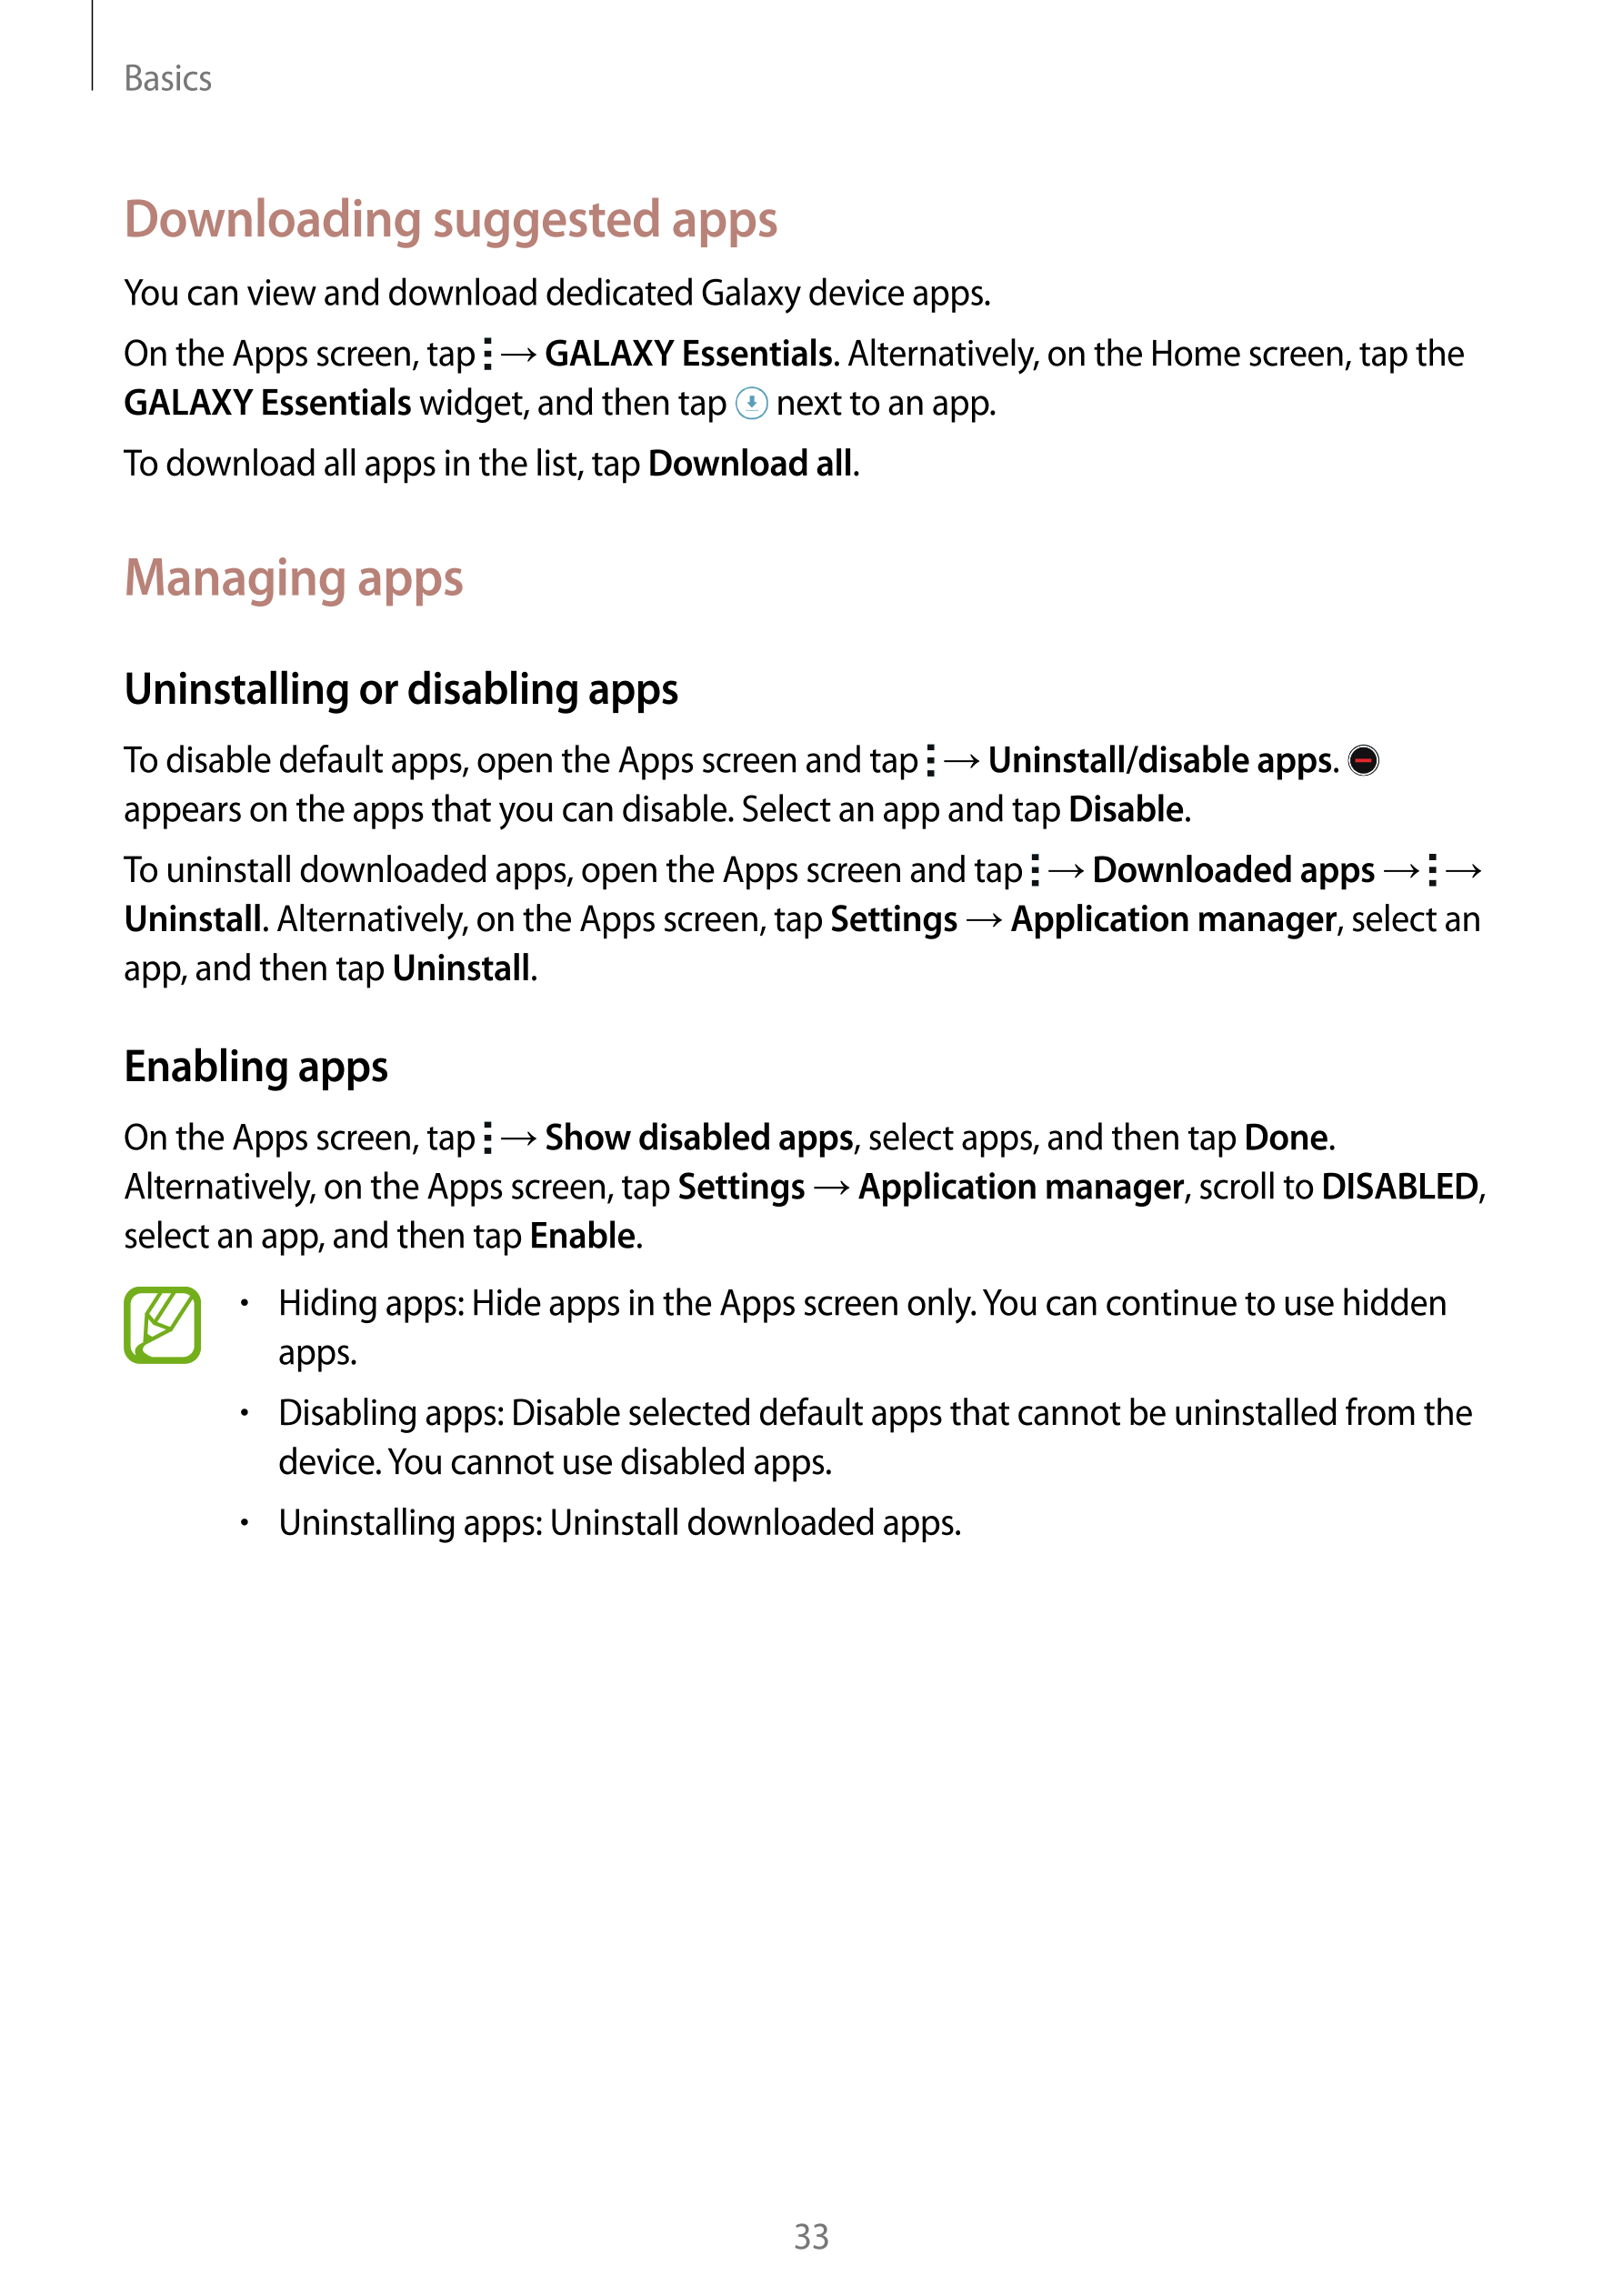 Basics
Downloading suggested apps
You can view and download dedicated Galaxy device apps.
On the Apps screen, tap    →  GALAXY E